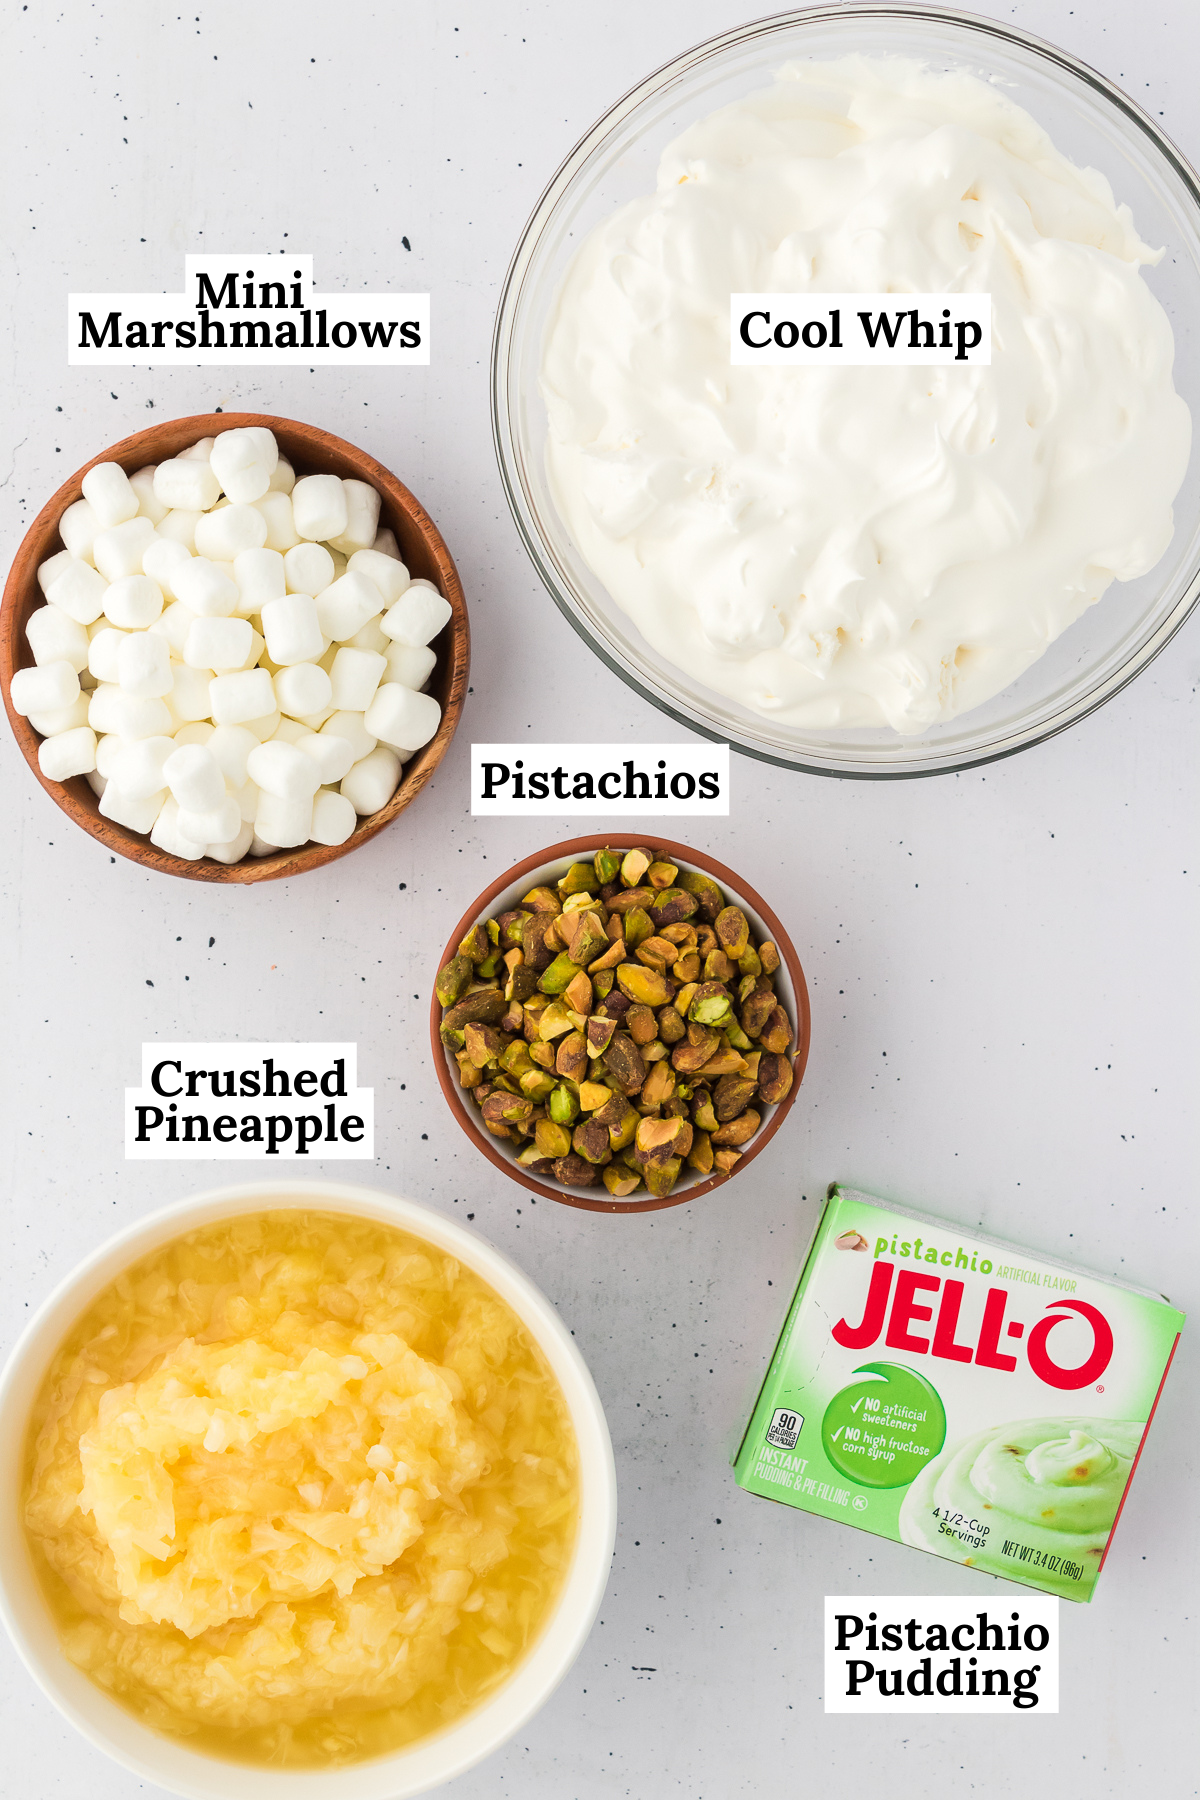 the ingredients for pistachio salad including pistachio pudding mix, crushed pineapple, cool whip, mini marshmallows, and chopped nuts